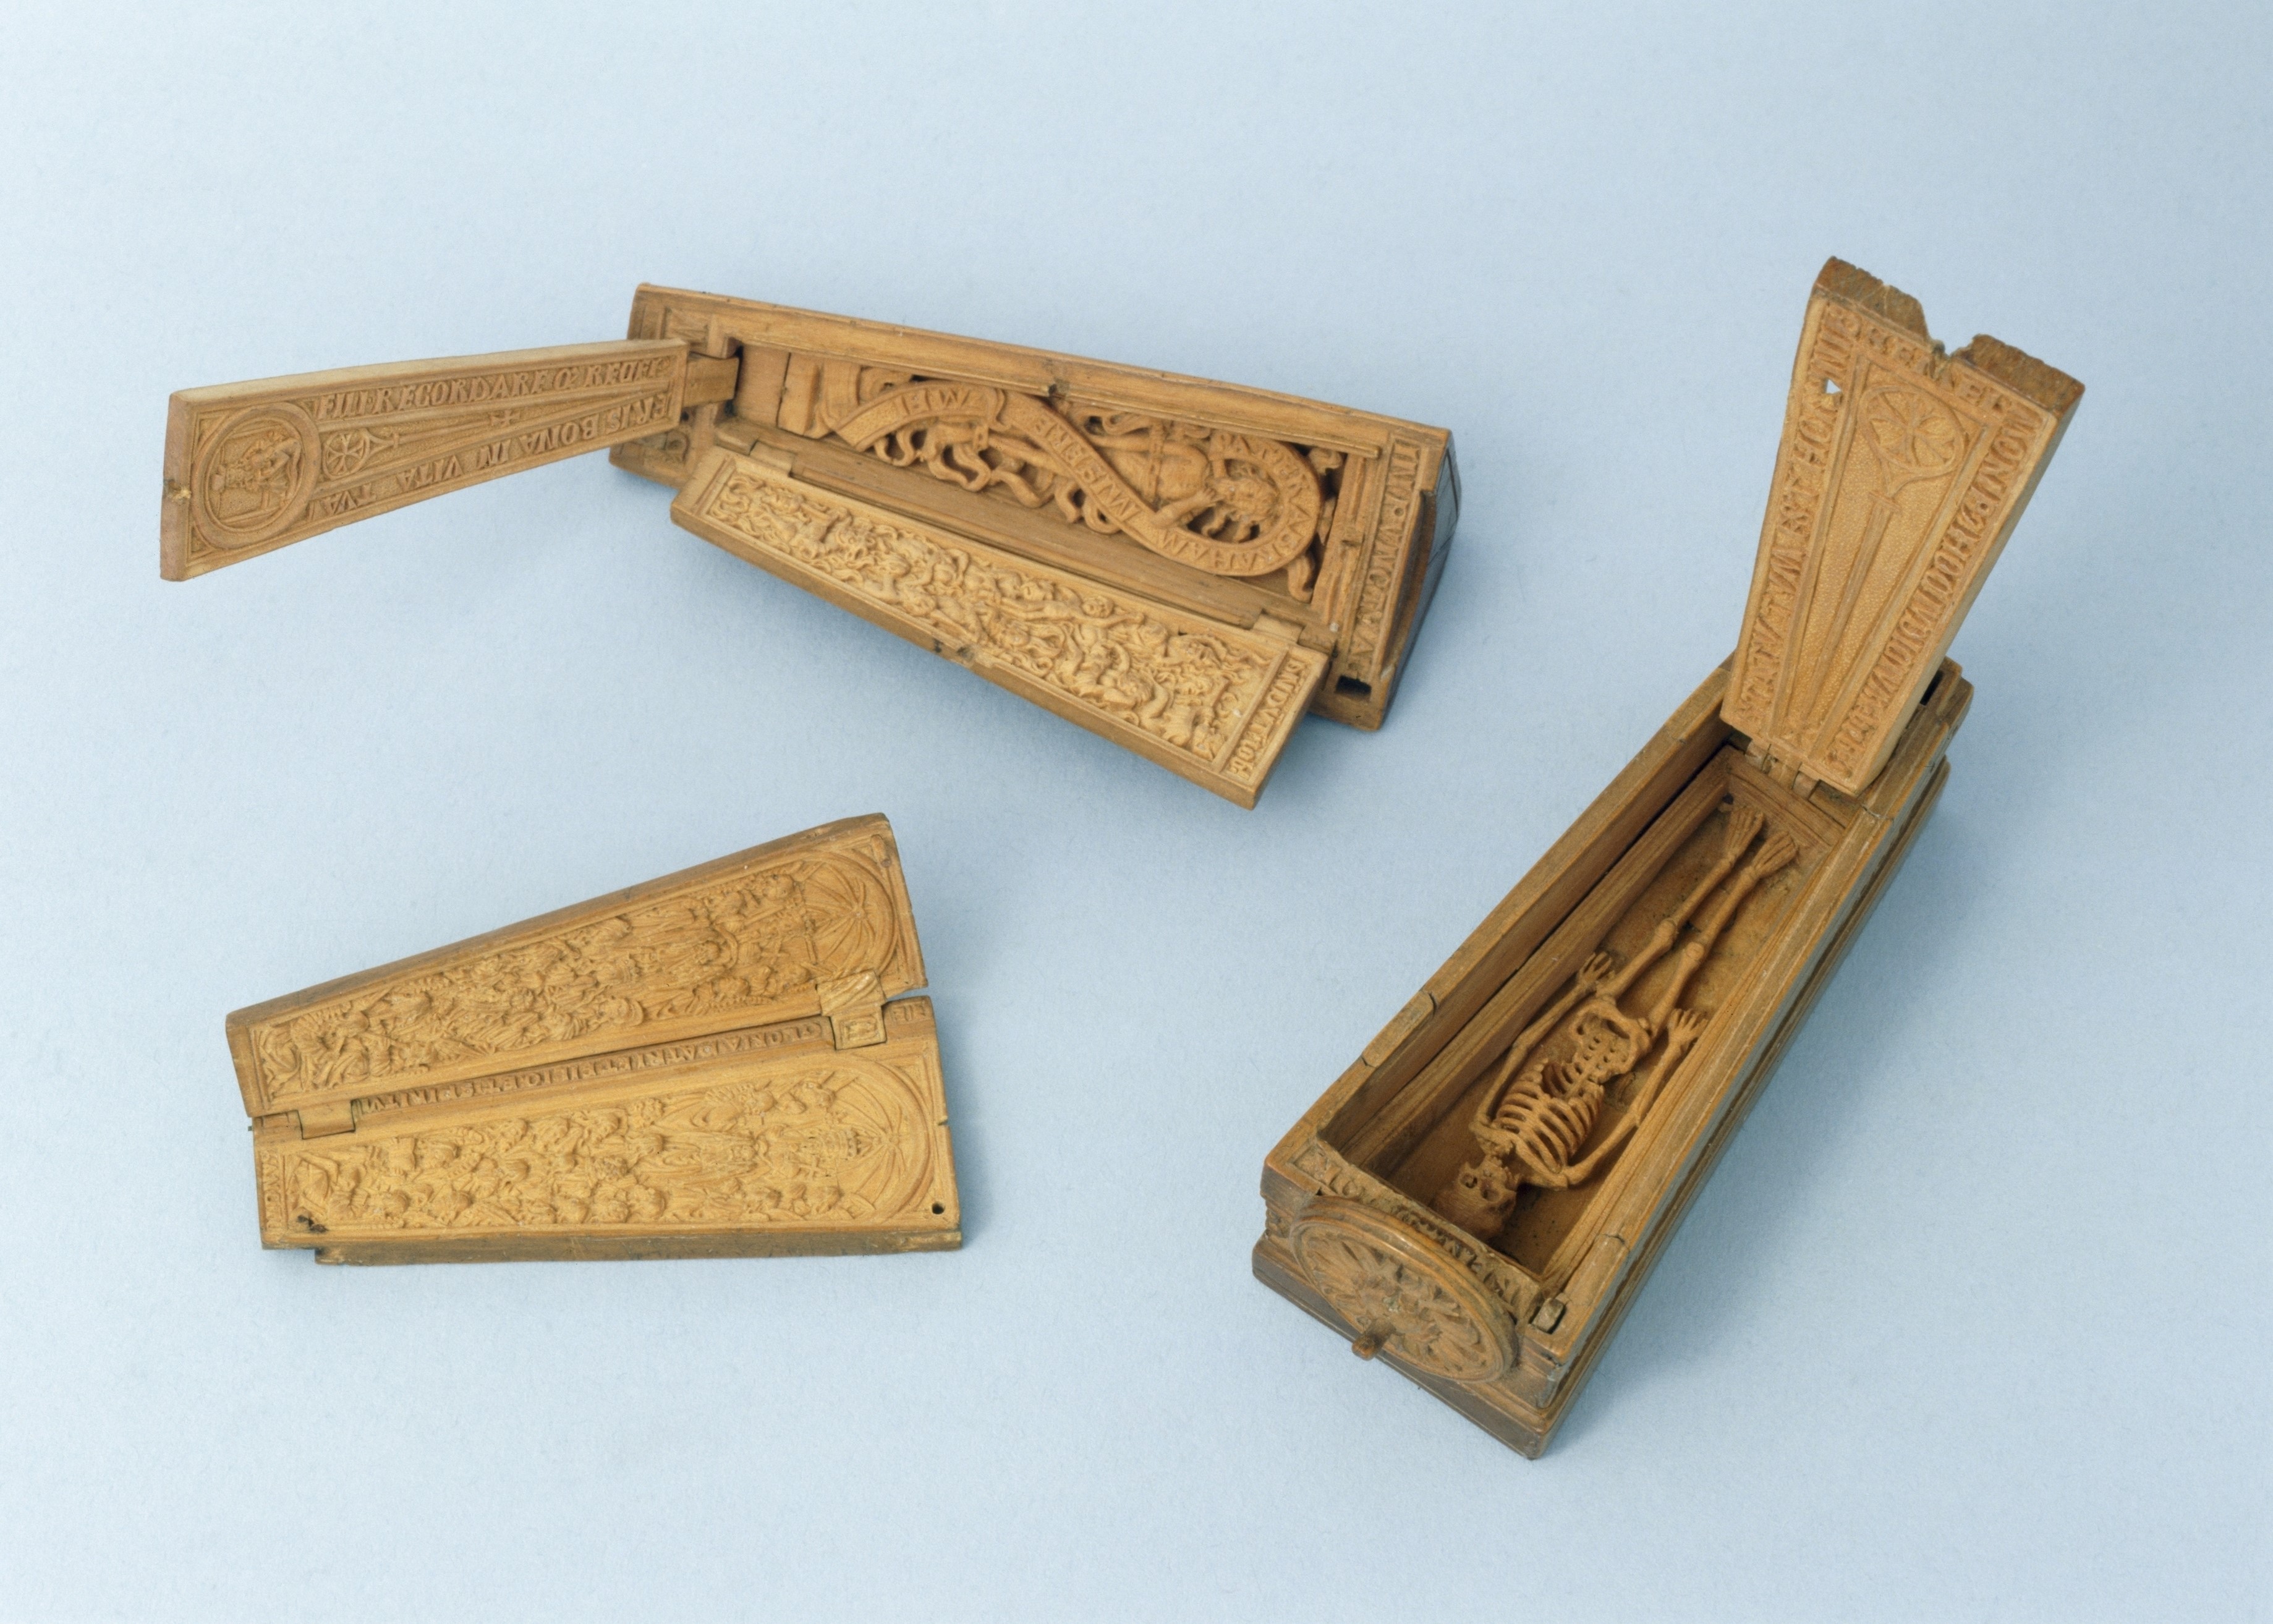 Boxwood miniature coffin replica with compartments and skeleton (Trustees of the Wernher Foundation)